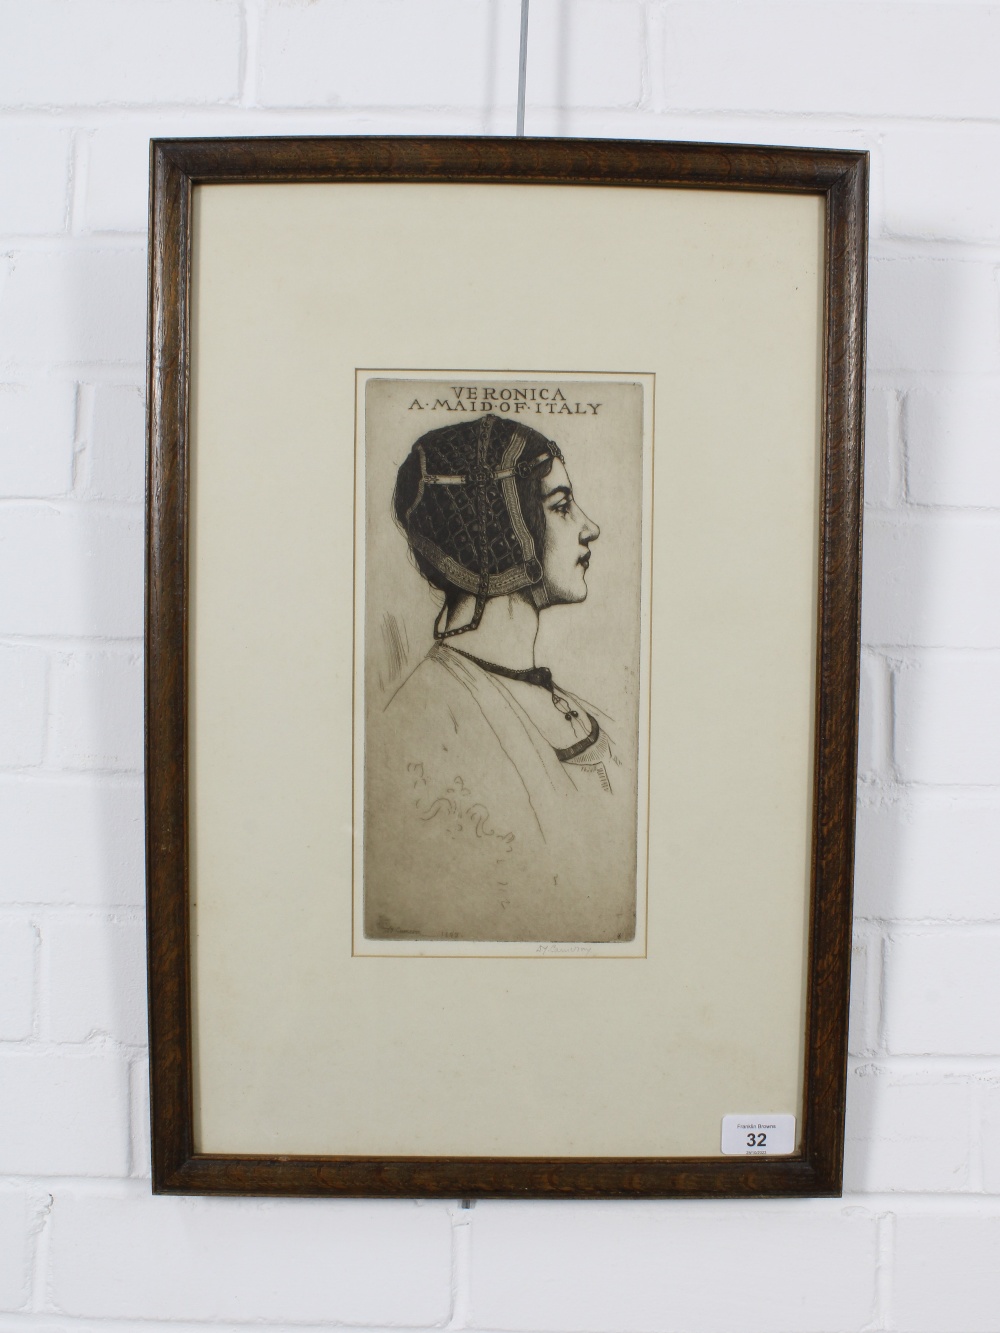 SIR DAVID YOUNG CAMERON (SCOTTISH 1865-1945) VERONICA, A MAID OF ITALY, etching, signed and dated in - Image 2 of 3